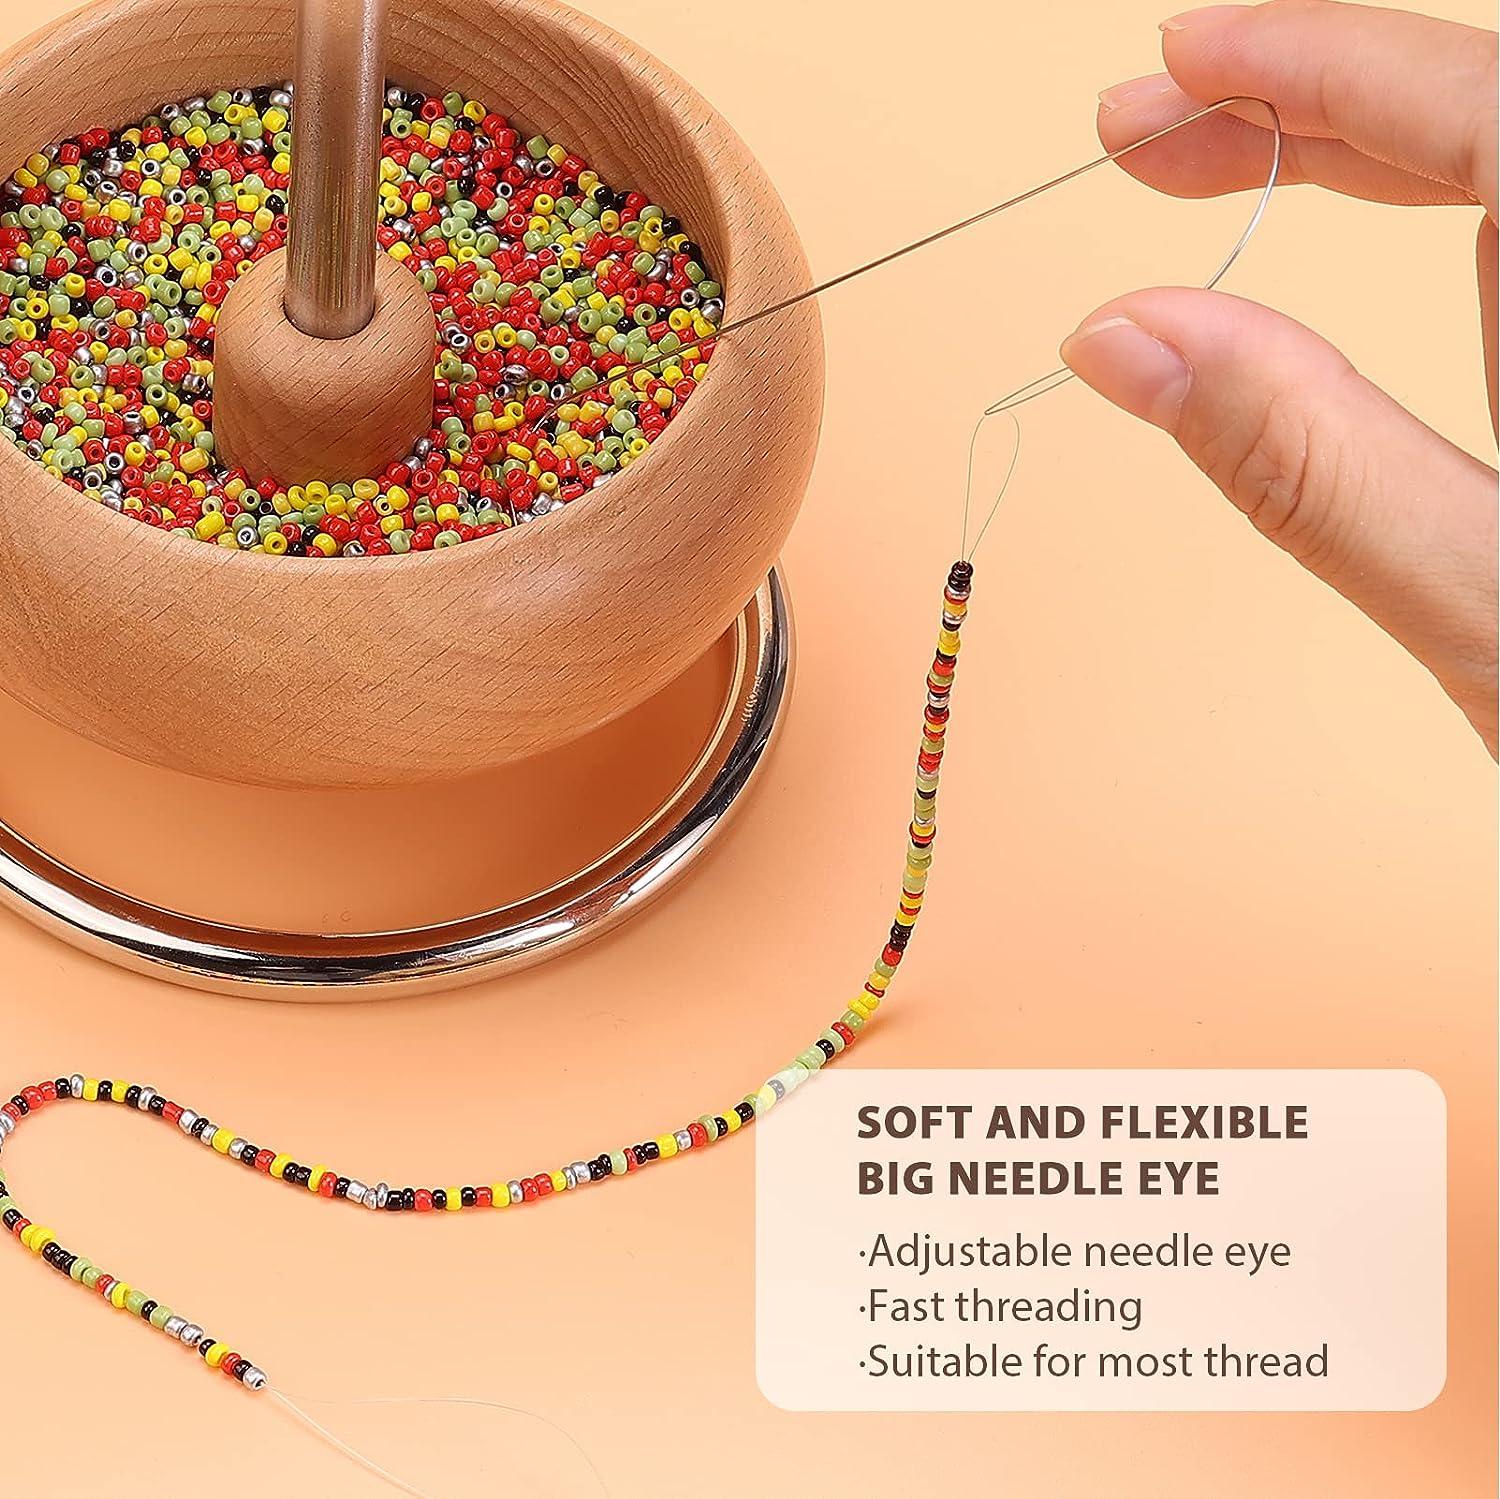 Clay Bead Spinner, Electric Bead Spinner for Jewelry Making, Bead Bowl for  Clay Beads with Needle and Thread, Making Waist Beads, Bracelets or